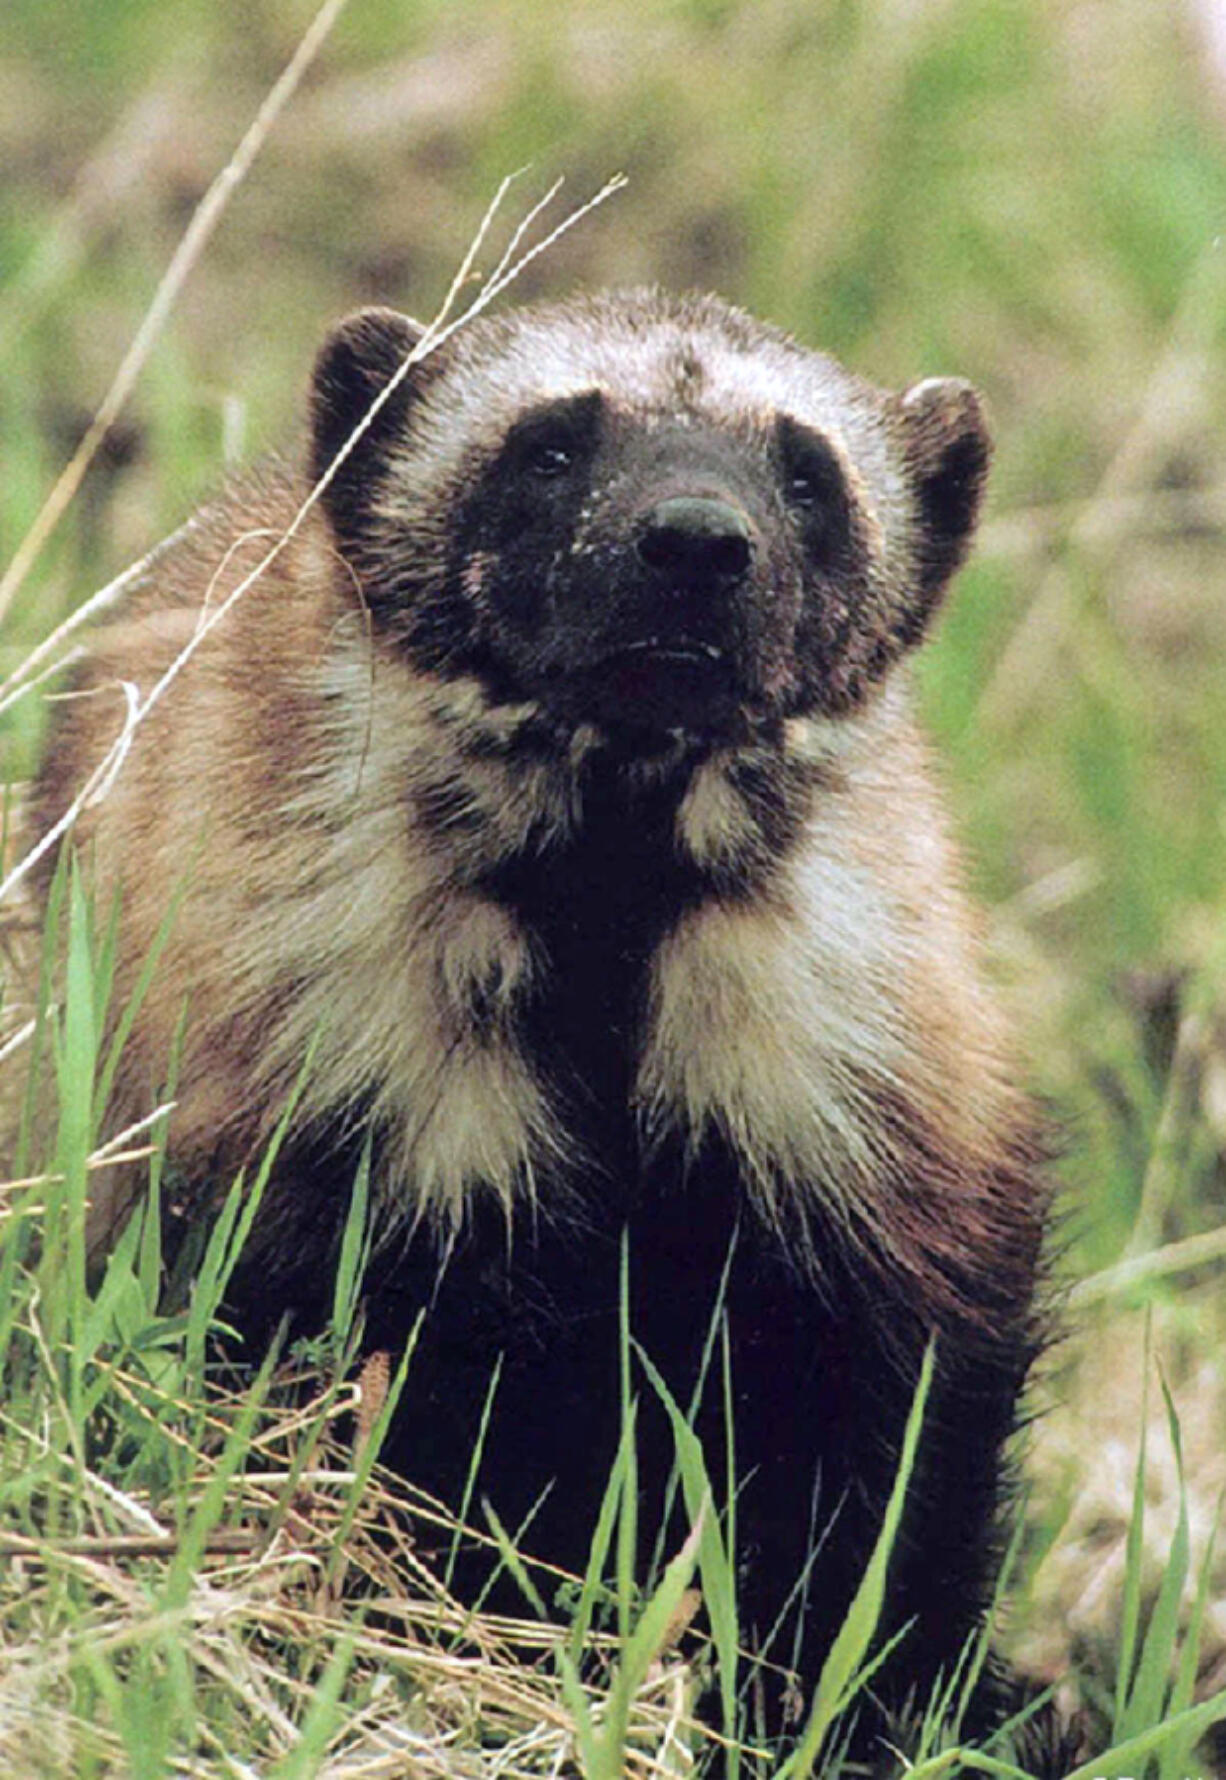 FILE - This undated file photo shows a wolverine in Montana&rsquo;s Glacier National Park. Scientists say climate change could harm populations of the elusive animals that live in alpine areas with deep snow.